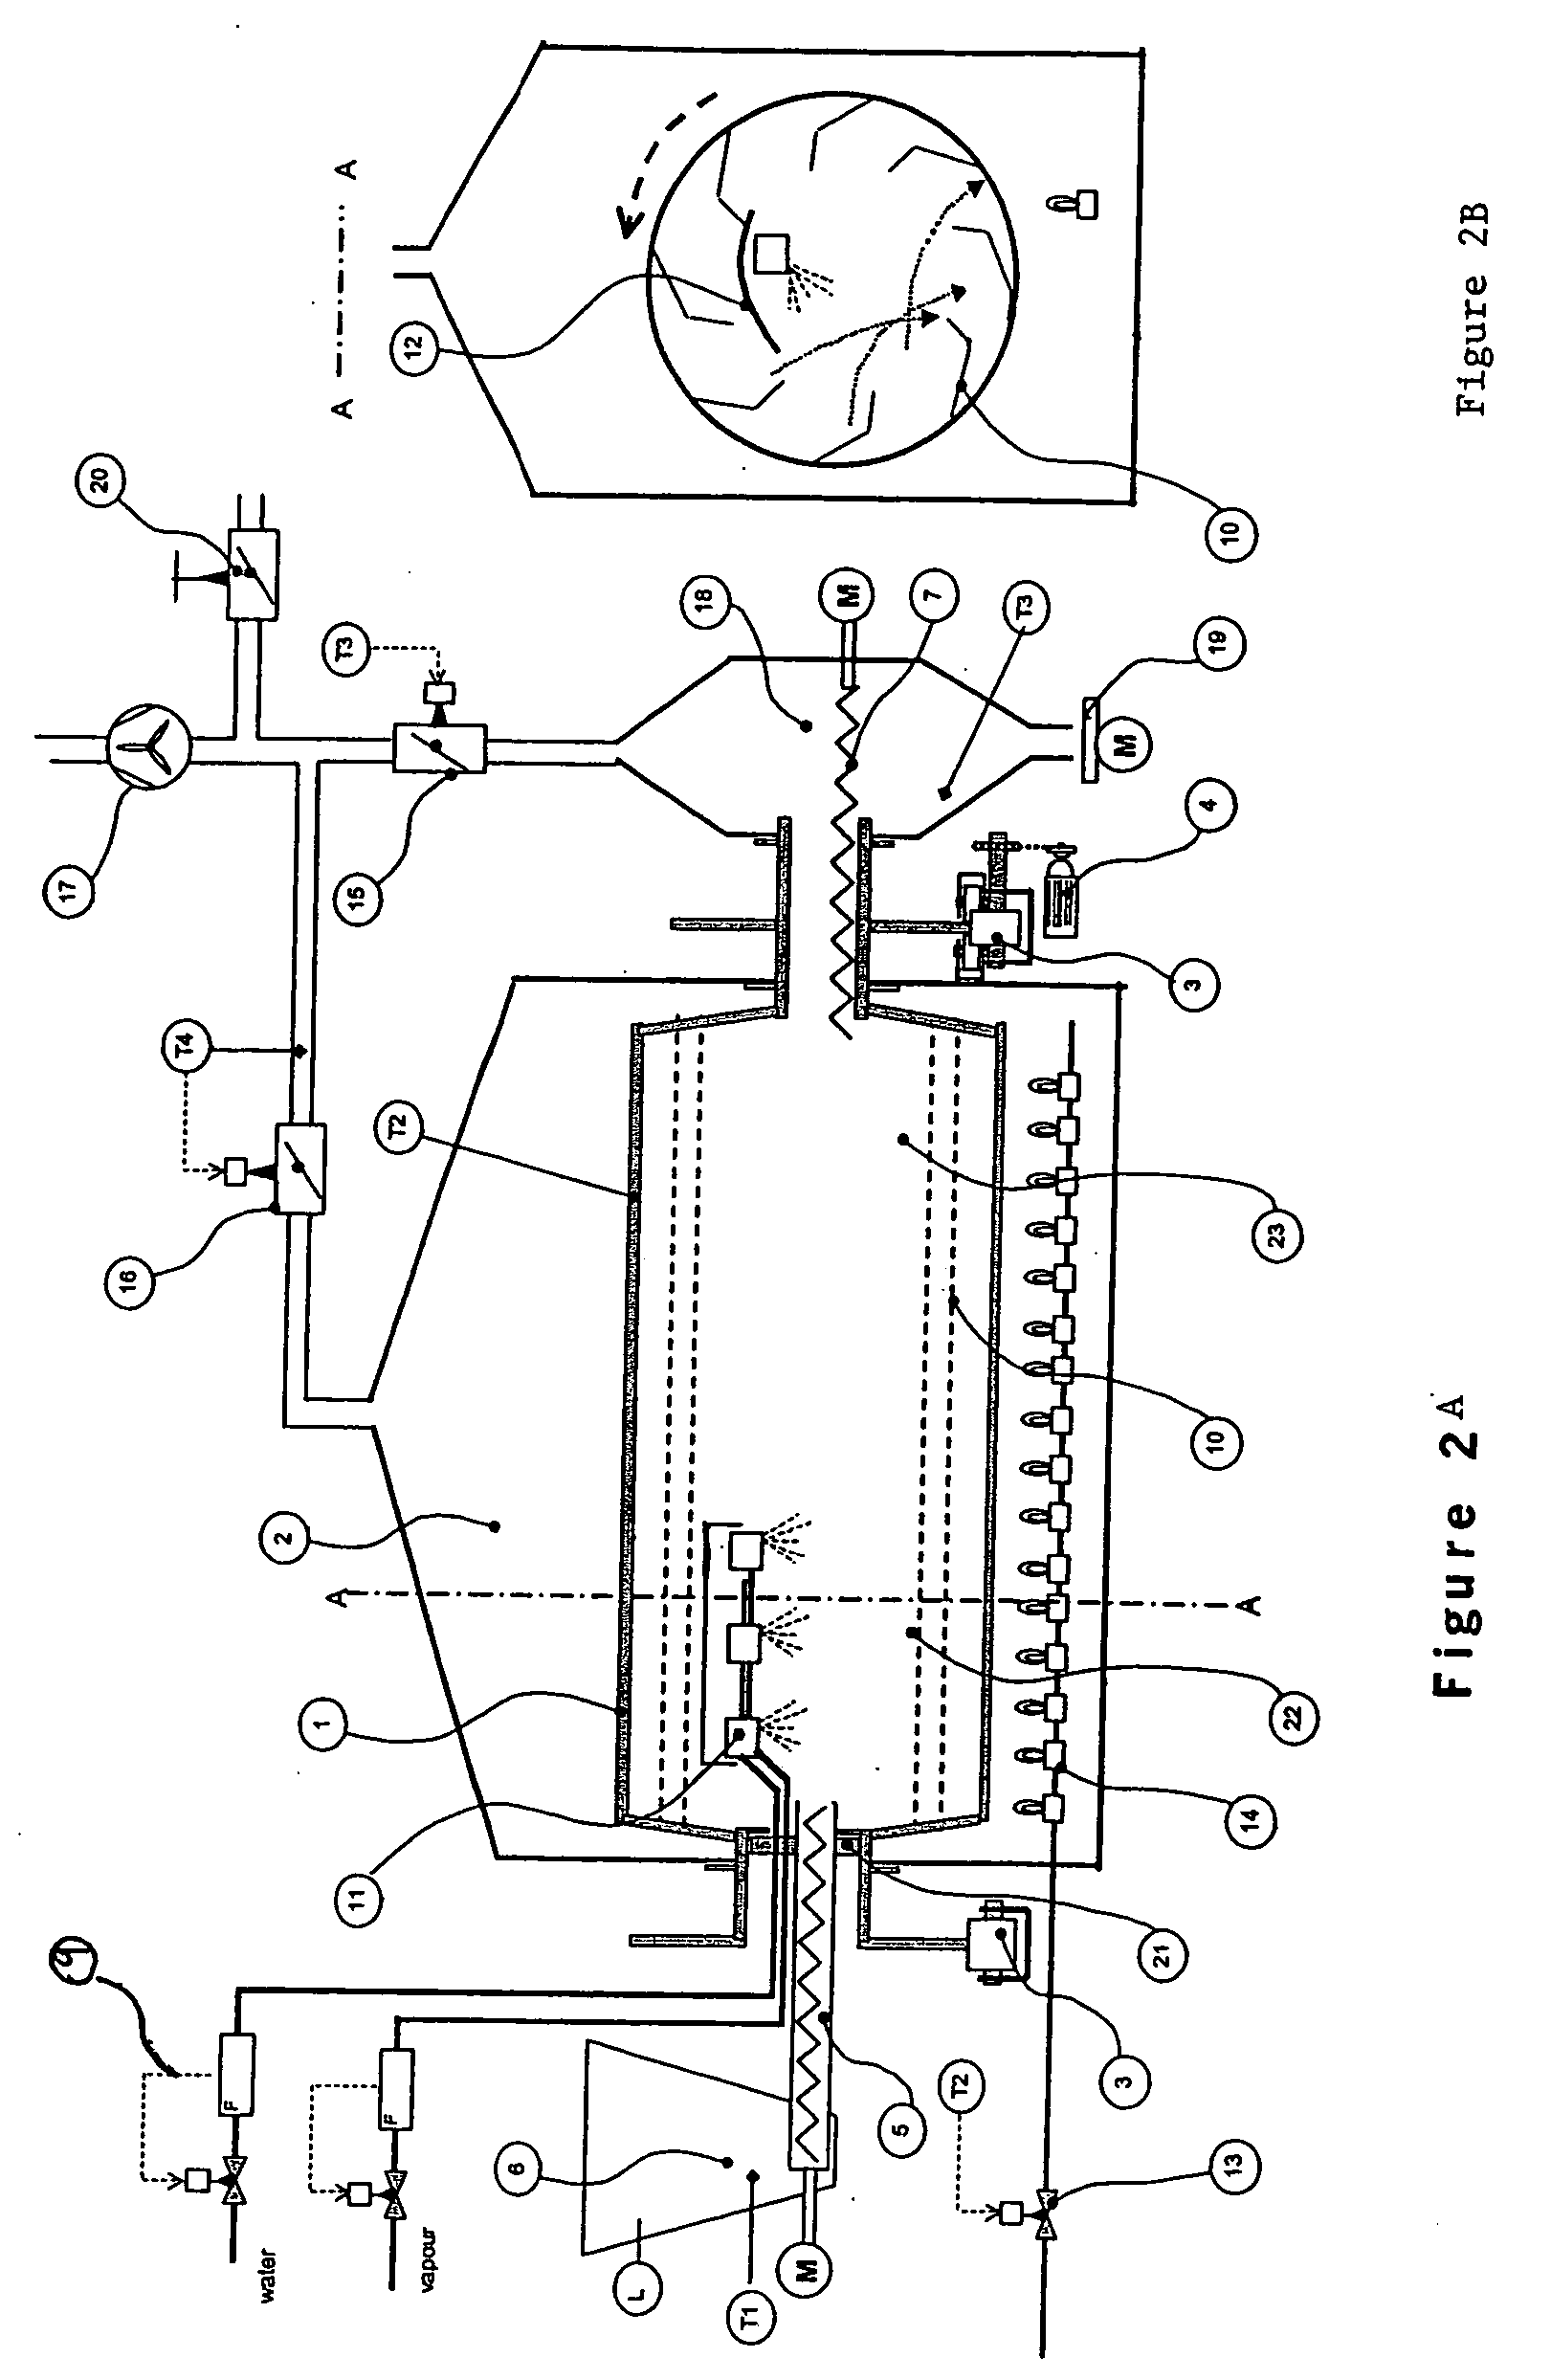 Method and apparatus for stabilizing plaster